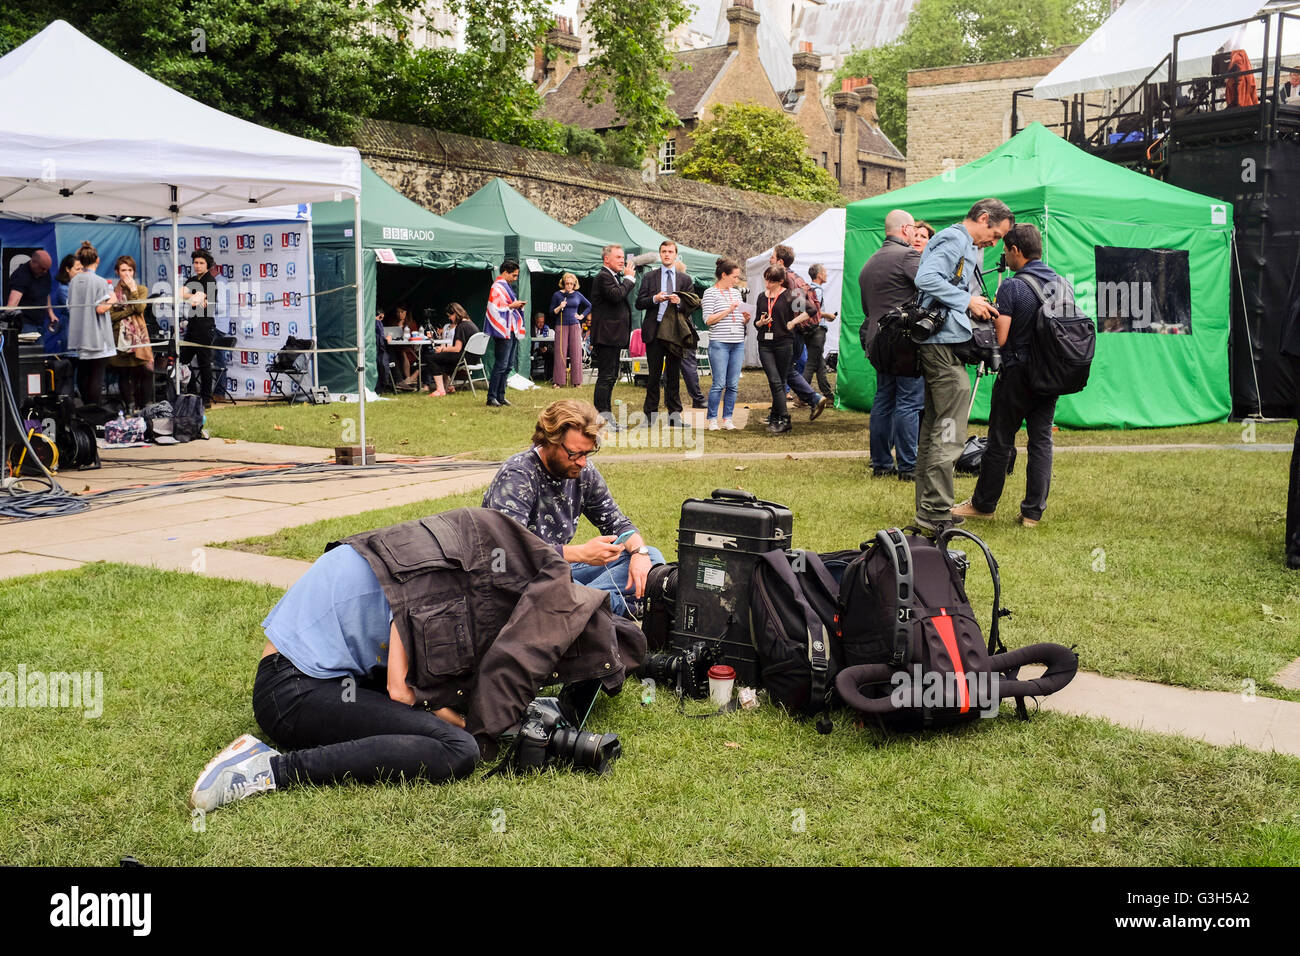 London, UK. 24 June 2016 Press photographers edit images in media area opposite Houses of Parliament following the result of UK referendum on EU membership. Credit:  mark phillips/Alamy Live News Stock Photo